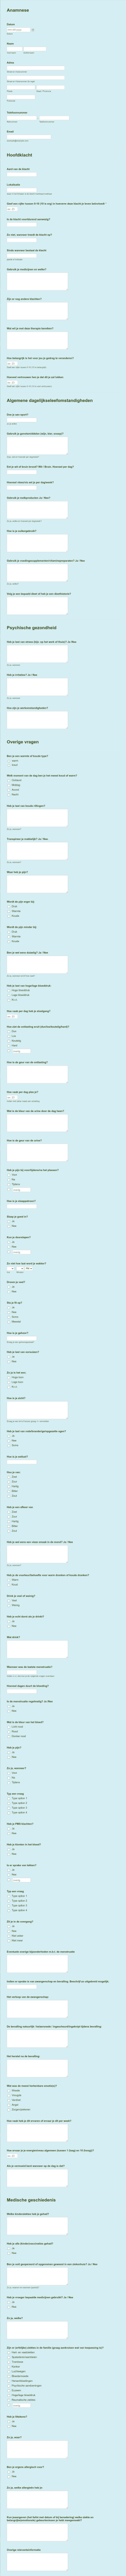 Anamnese Form Template